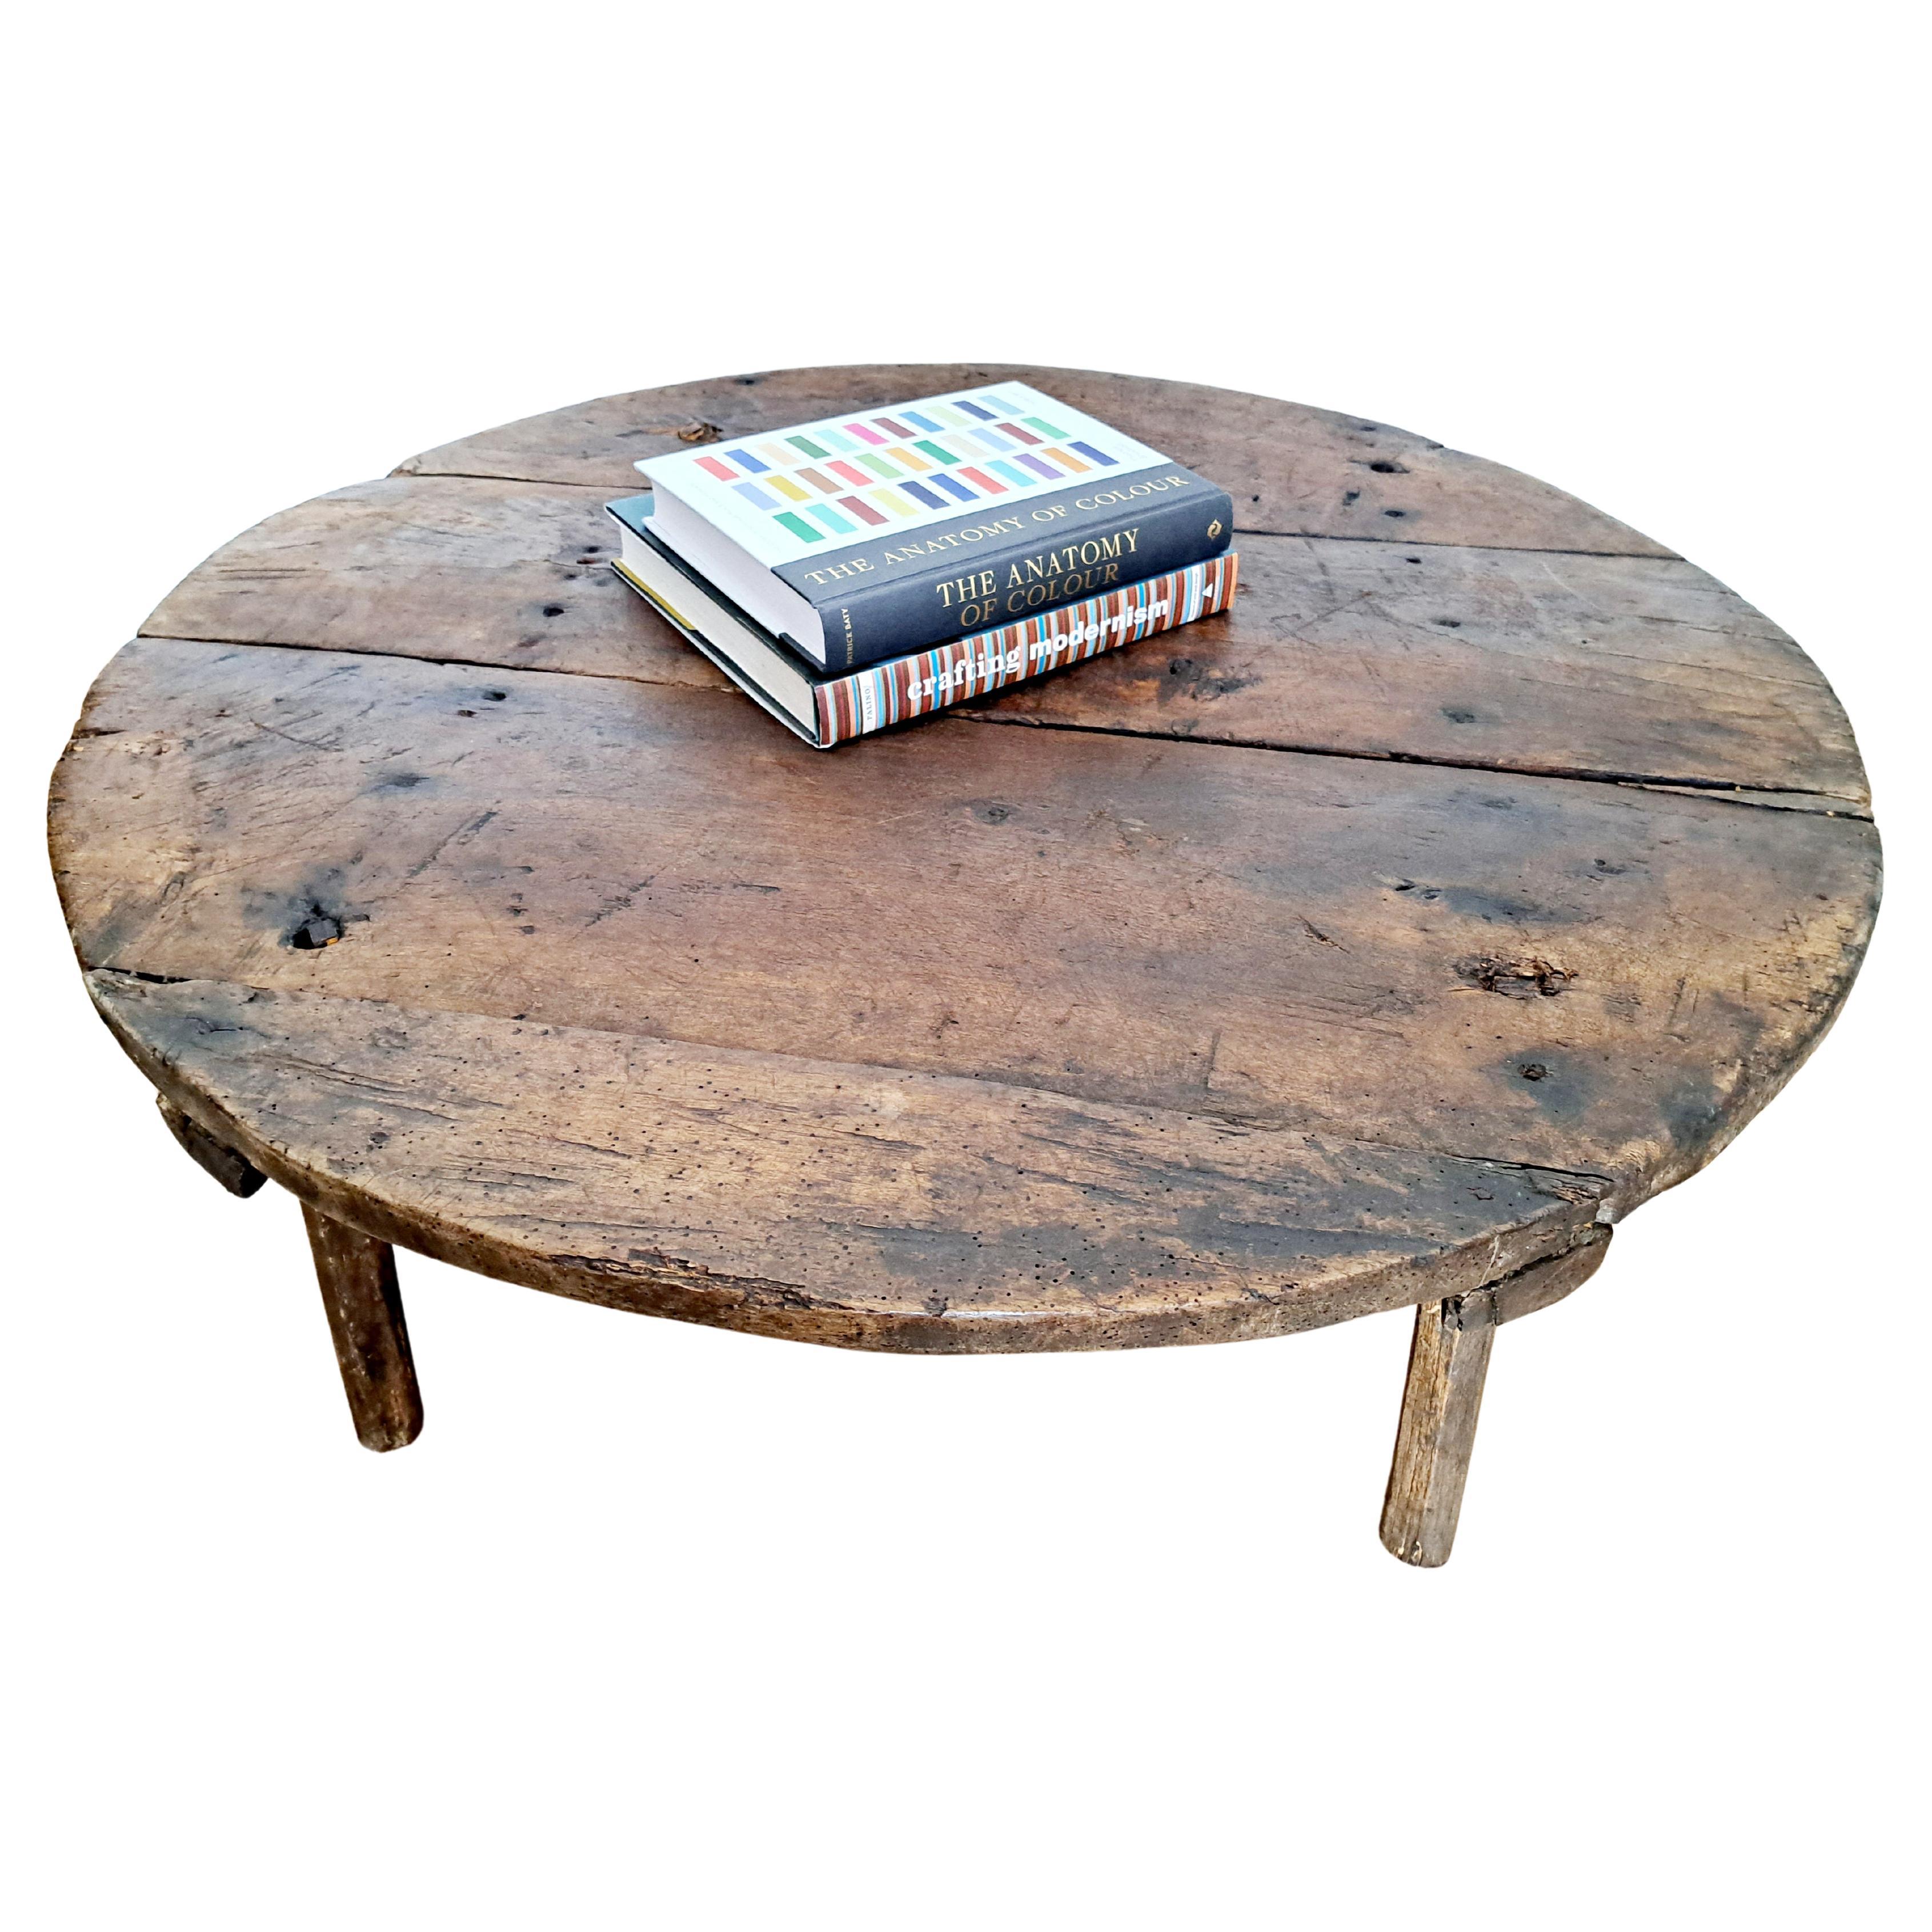 19th-century pine wooden coffee table, stitched with either wood or iron. Heavily patinated and full of character - functioning as a unique coffee table. Celebrating the cracks and crevices and all the other marks that time and loving use have left